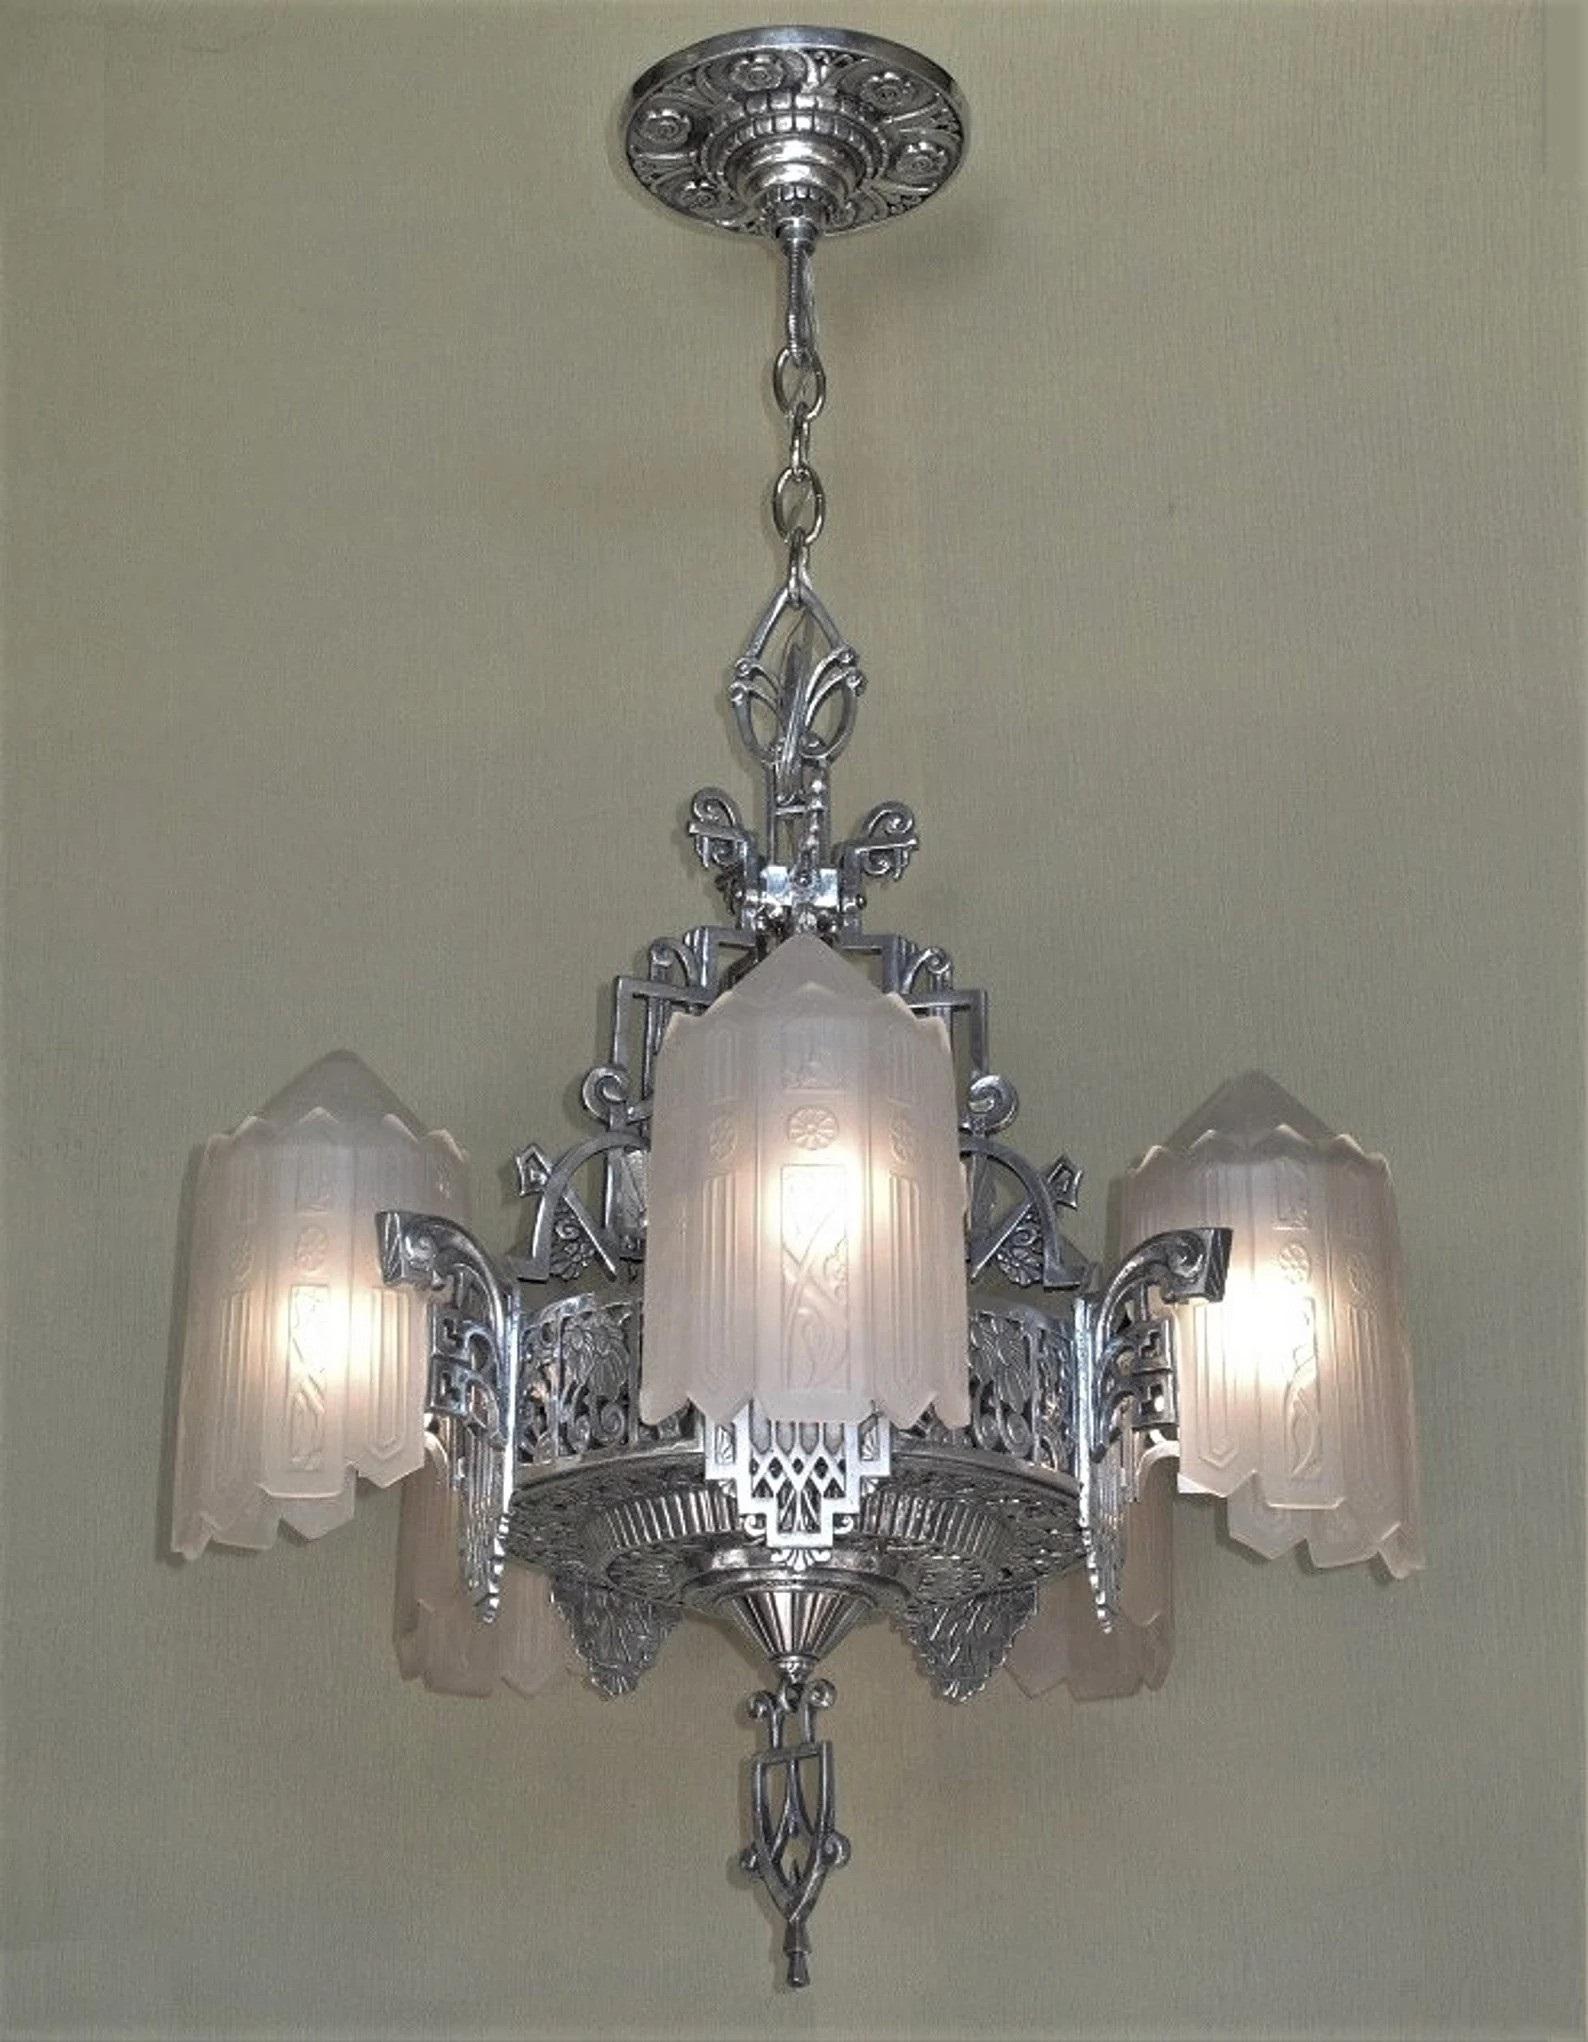 From the heights of the Art Deco movement and the depths of the Great Depression comes Lincoln Lighting Co's, Detroit, Mich., most opulent and beautiful chandelier.
I cannot even begin to describe the intricate, meticulous, detailed and harmonious